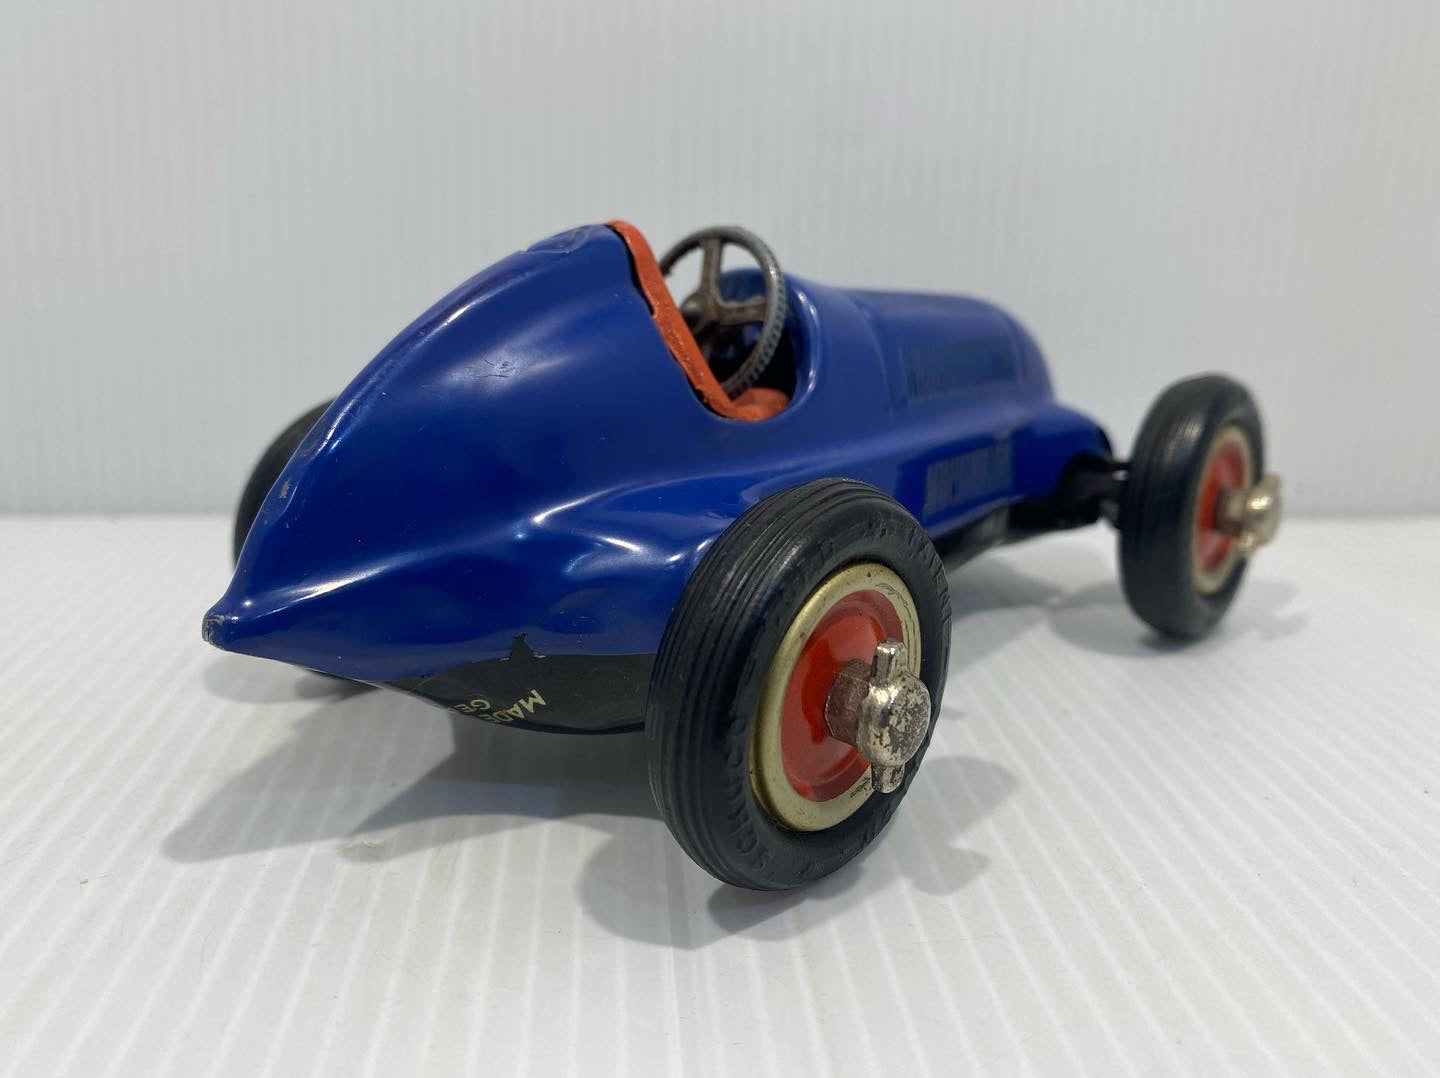 Original 1950s Schuco studio Racer 1050 Car Tin Plate Wind Up . Made in Germany US zone.